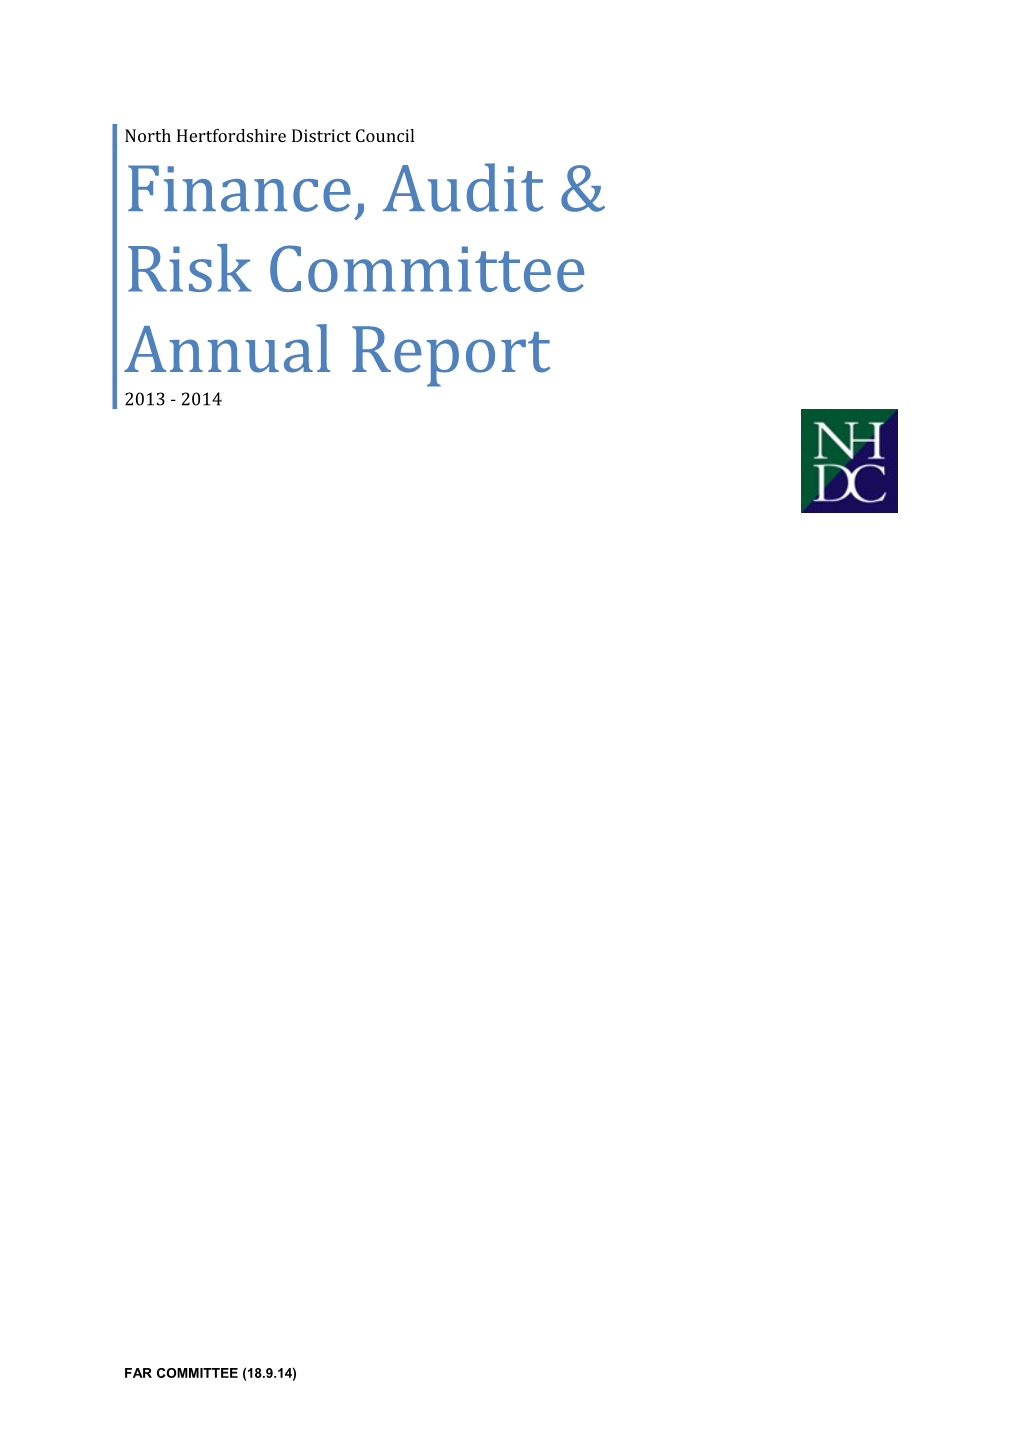 Finance, Audit & Risk Committee Annual Report